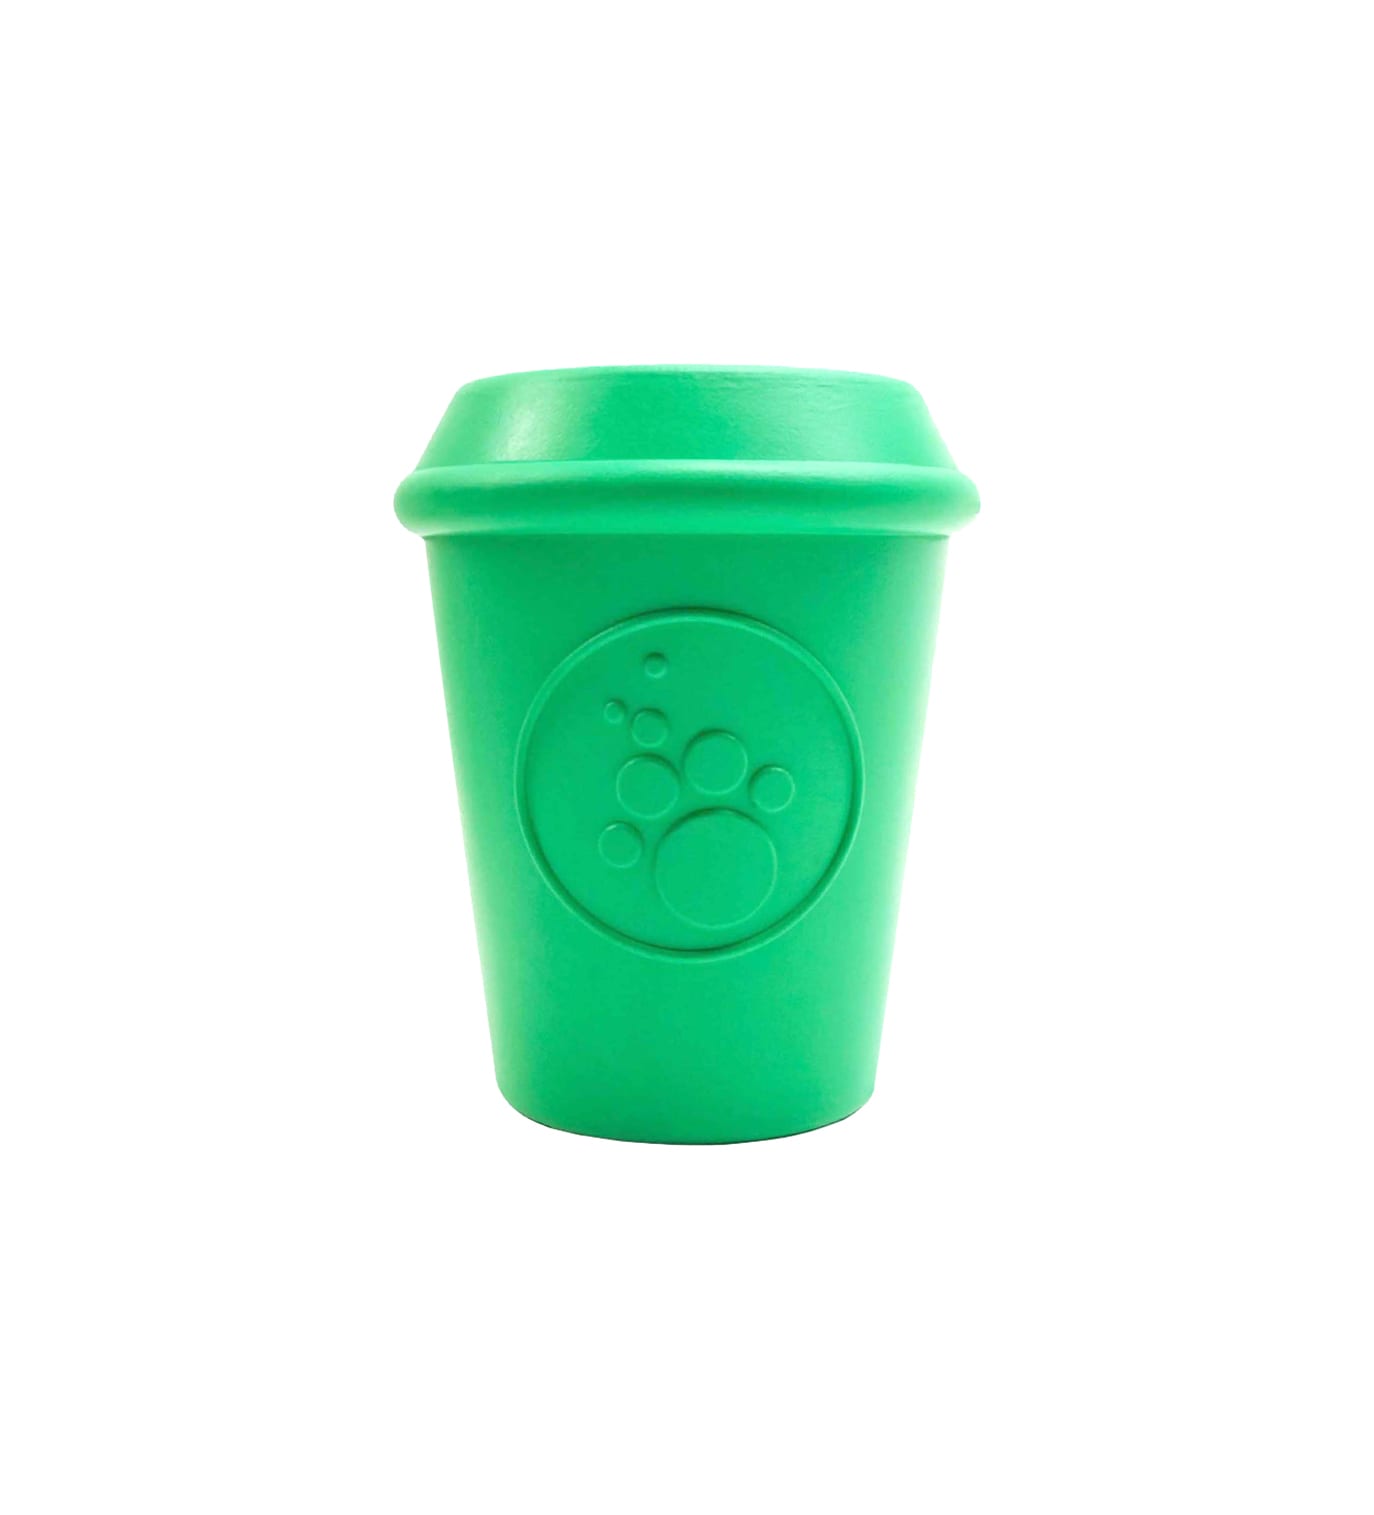 https://mooshiepets.com/content/uploads/2019/12/SODAPUP-COFFEE-CUP-CHEW-TOY-AND-TREAT-DISPENSER-FOR-DOGS-Front-.jpg